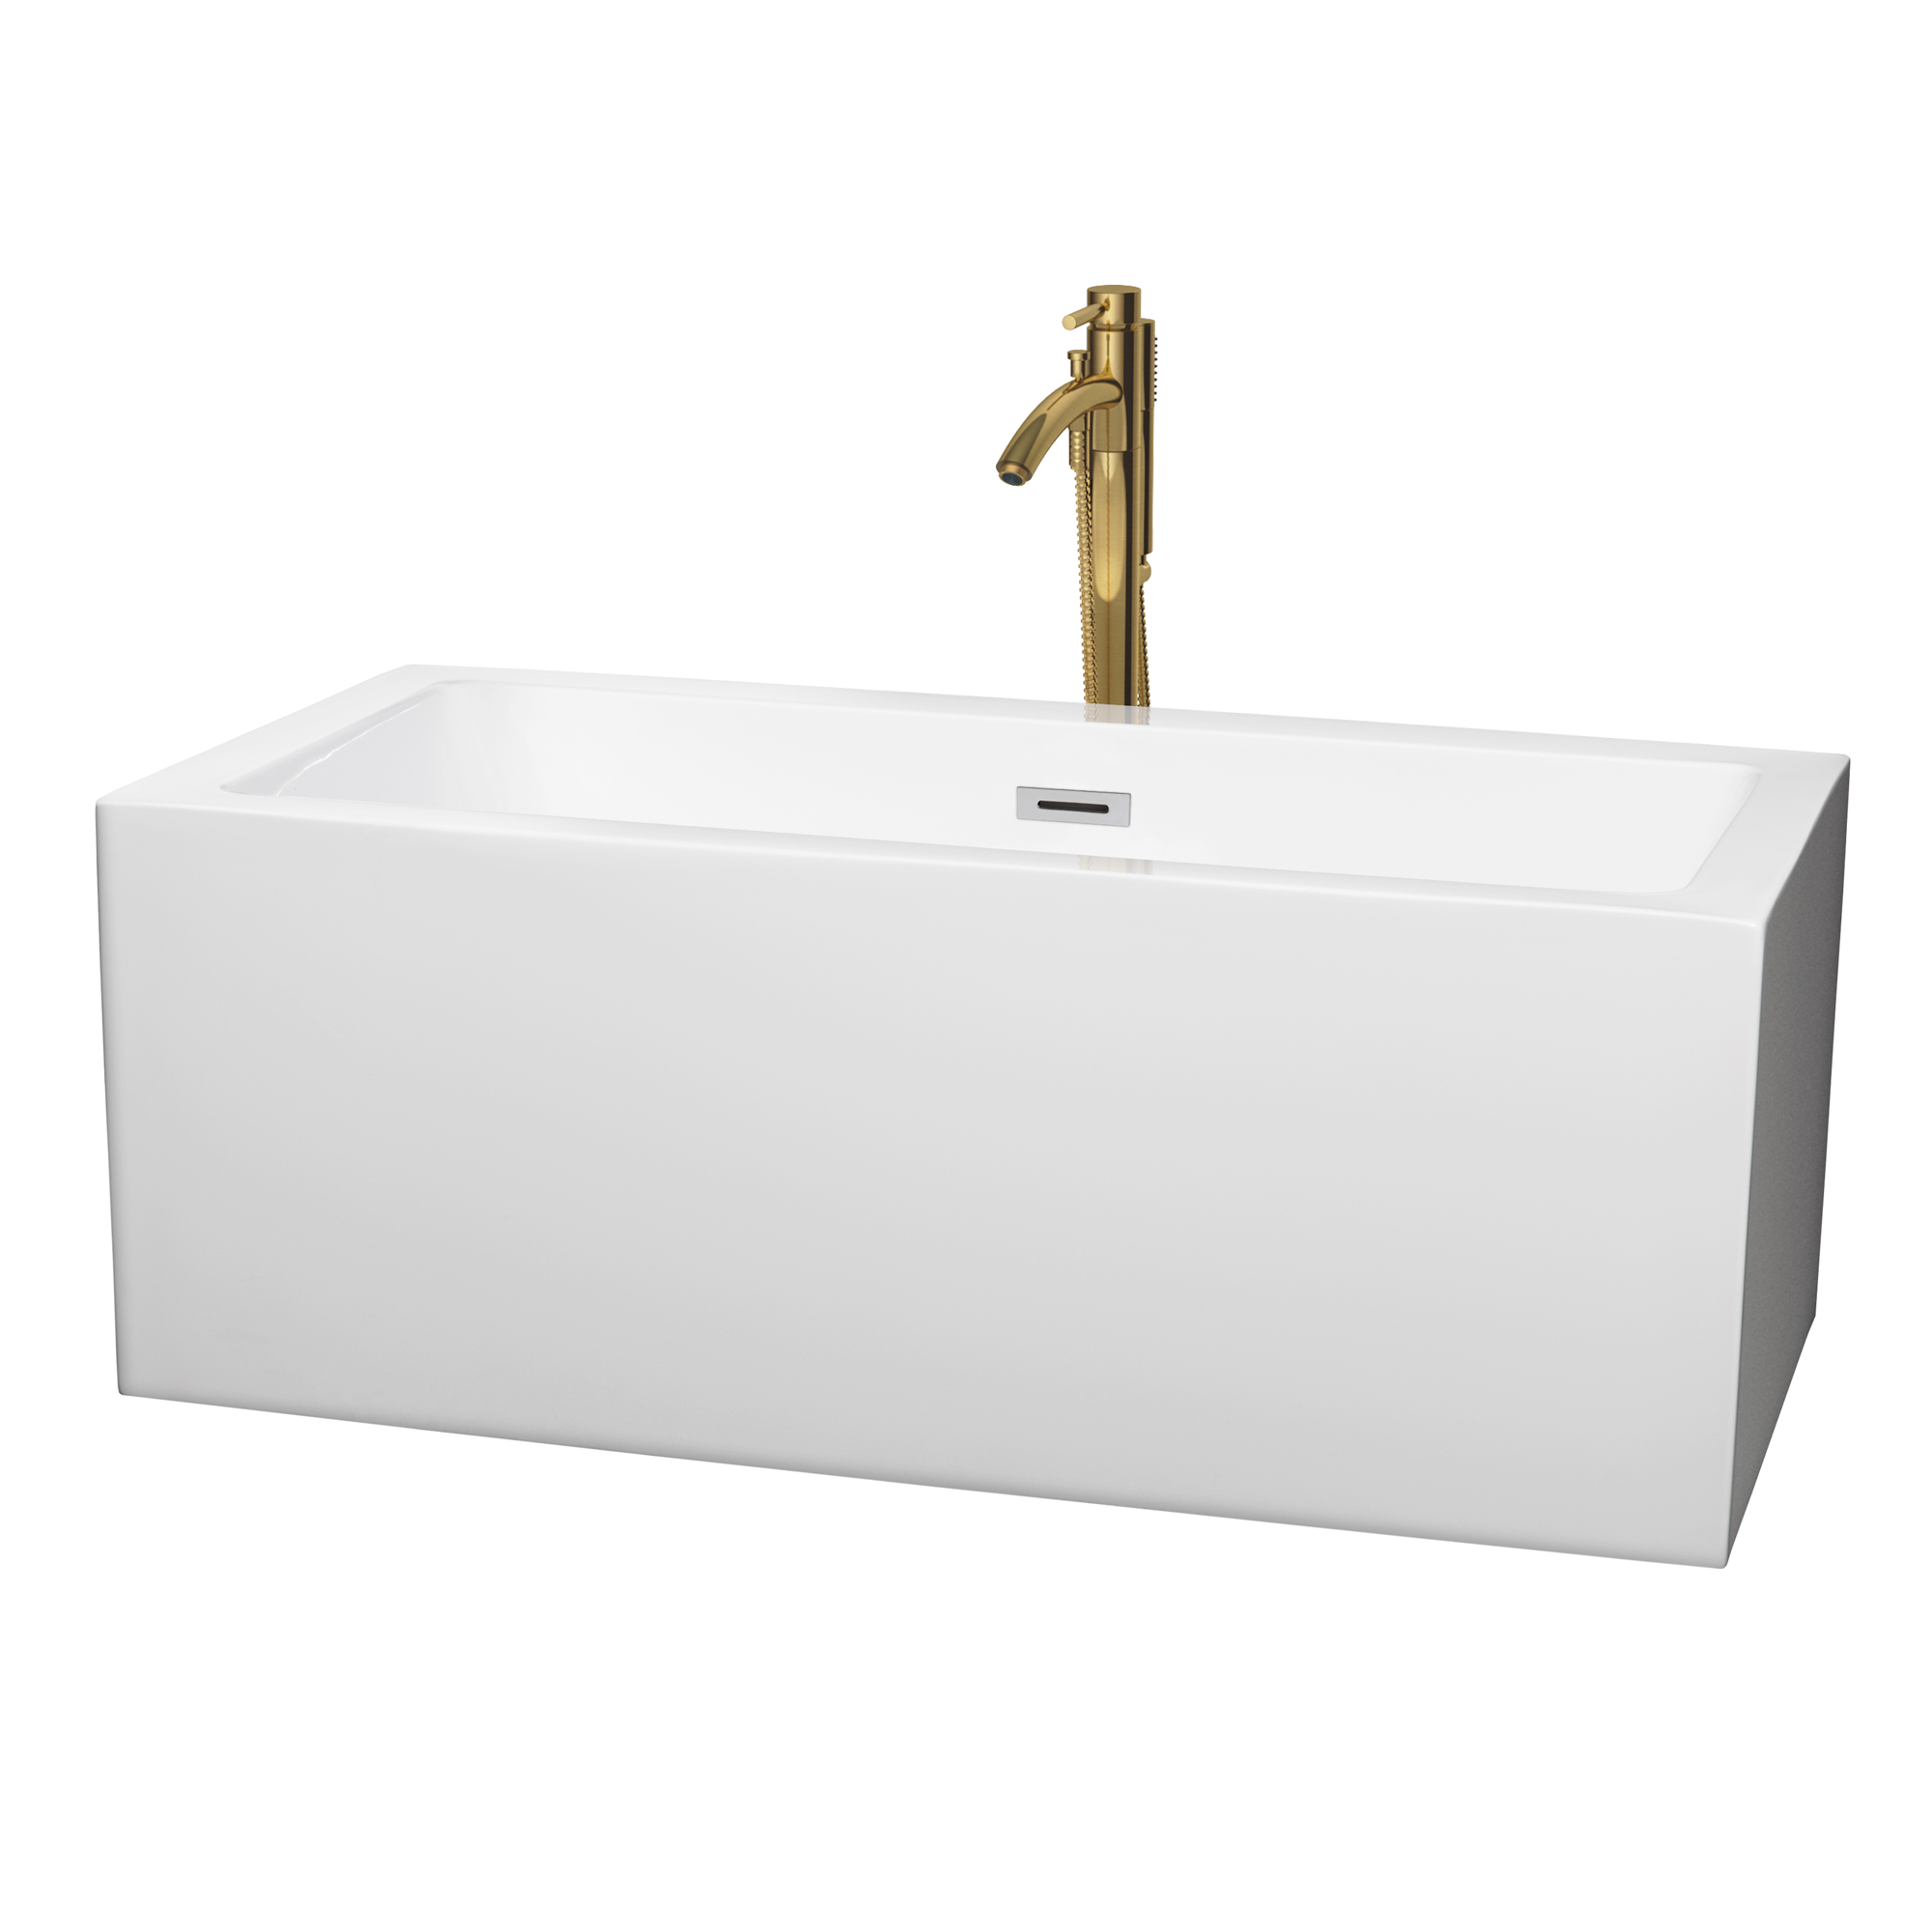 60" Freestanding Bathtub in White with Polished Chrome Trim and Floor Mounted Faucet in Brushed Gold Finish